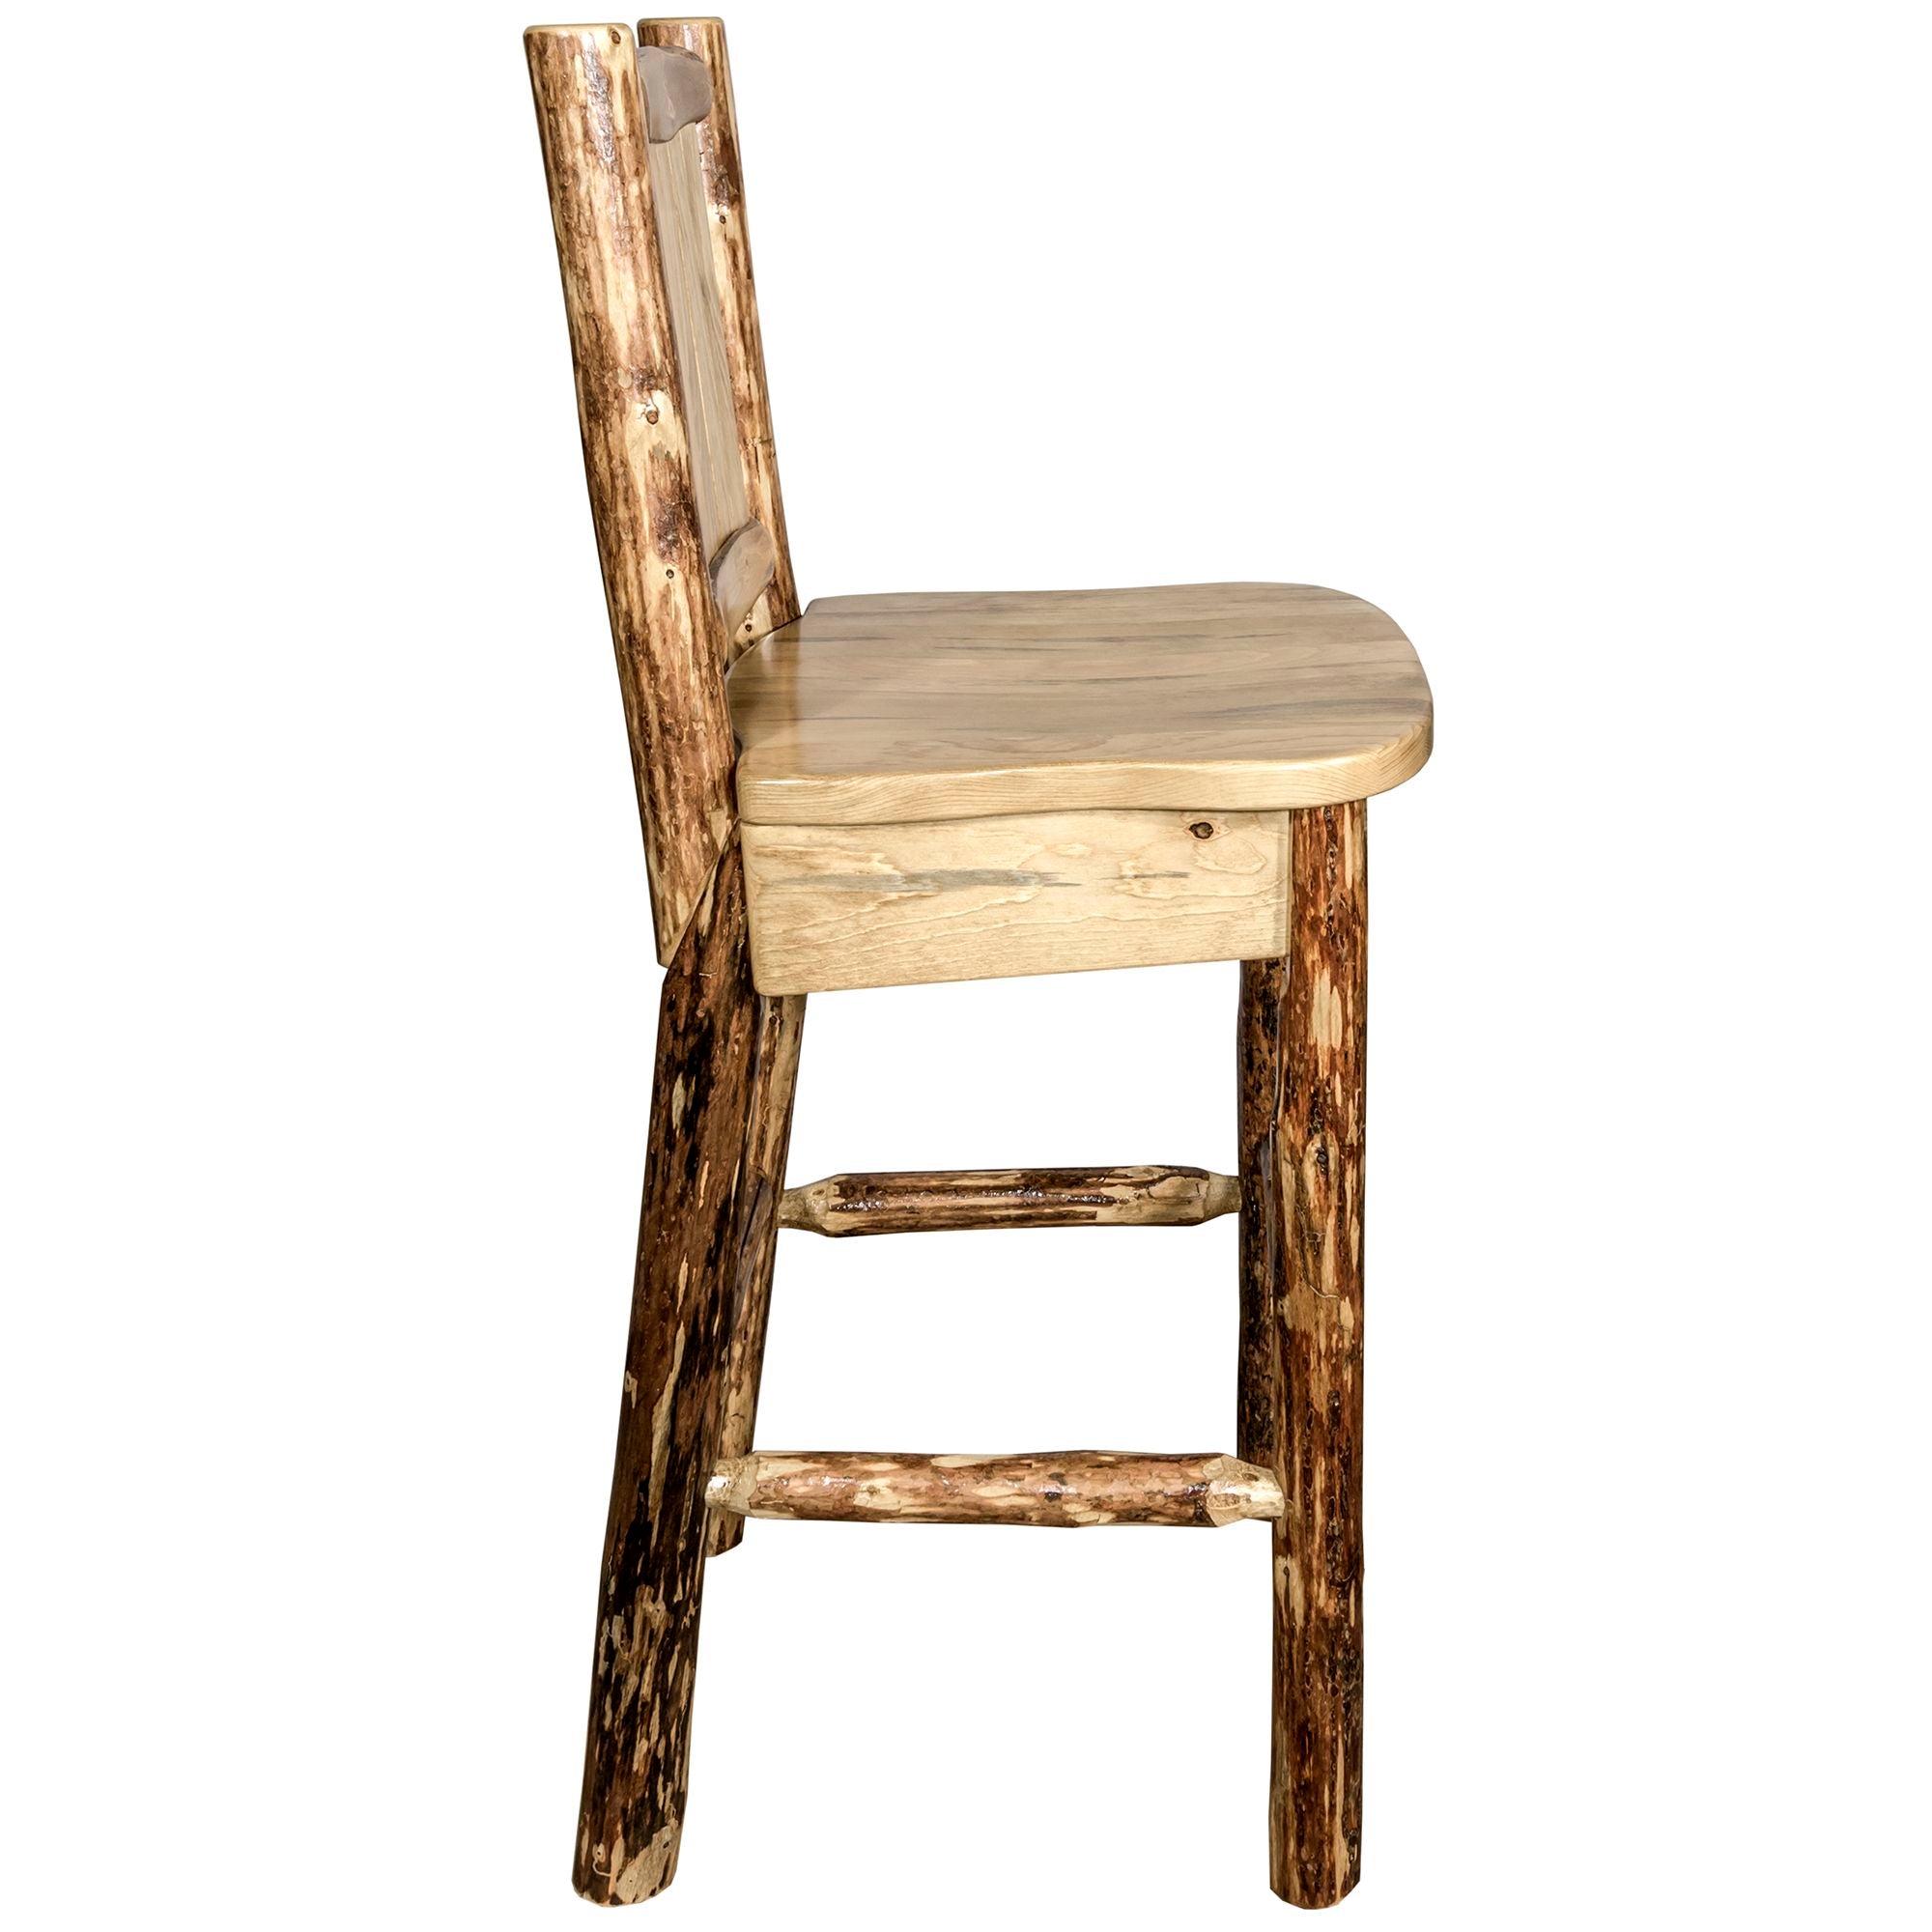 Montana Glacier Country Collection MWGCBSWNRLZ Barstool With Back and Laser Engraved Design Side